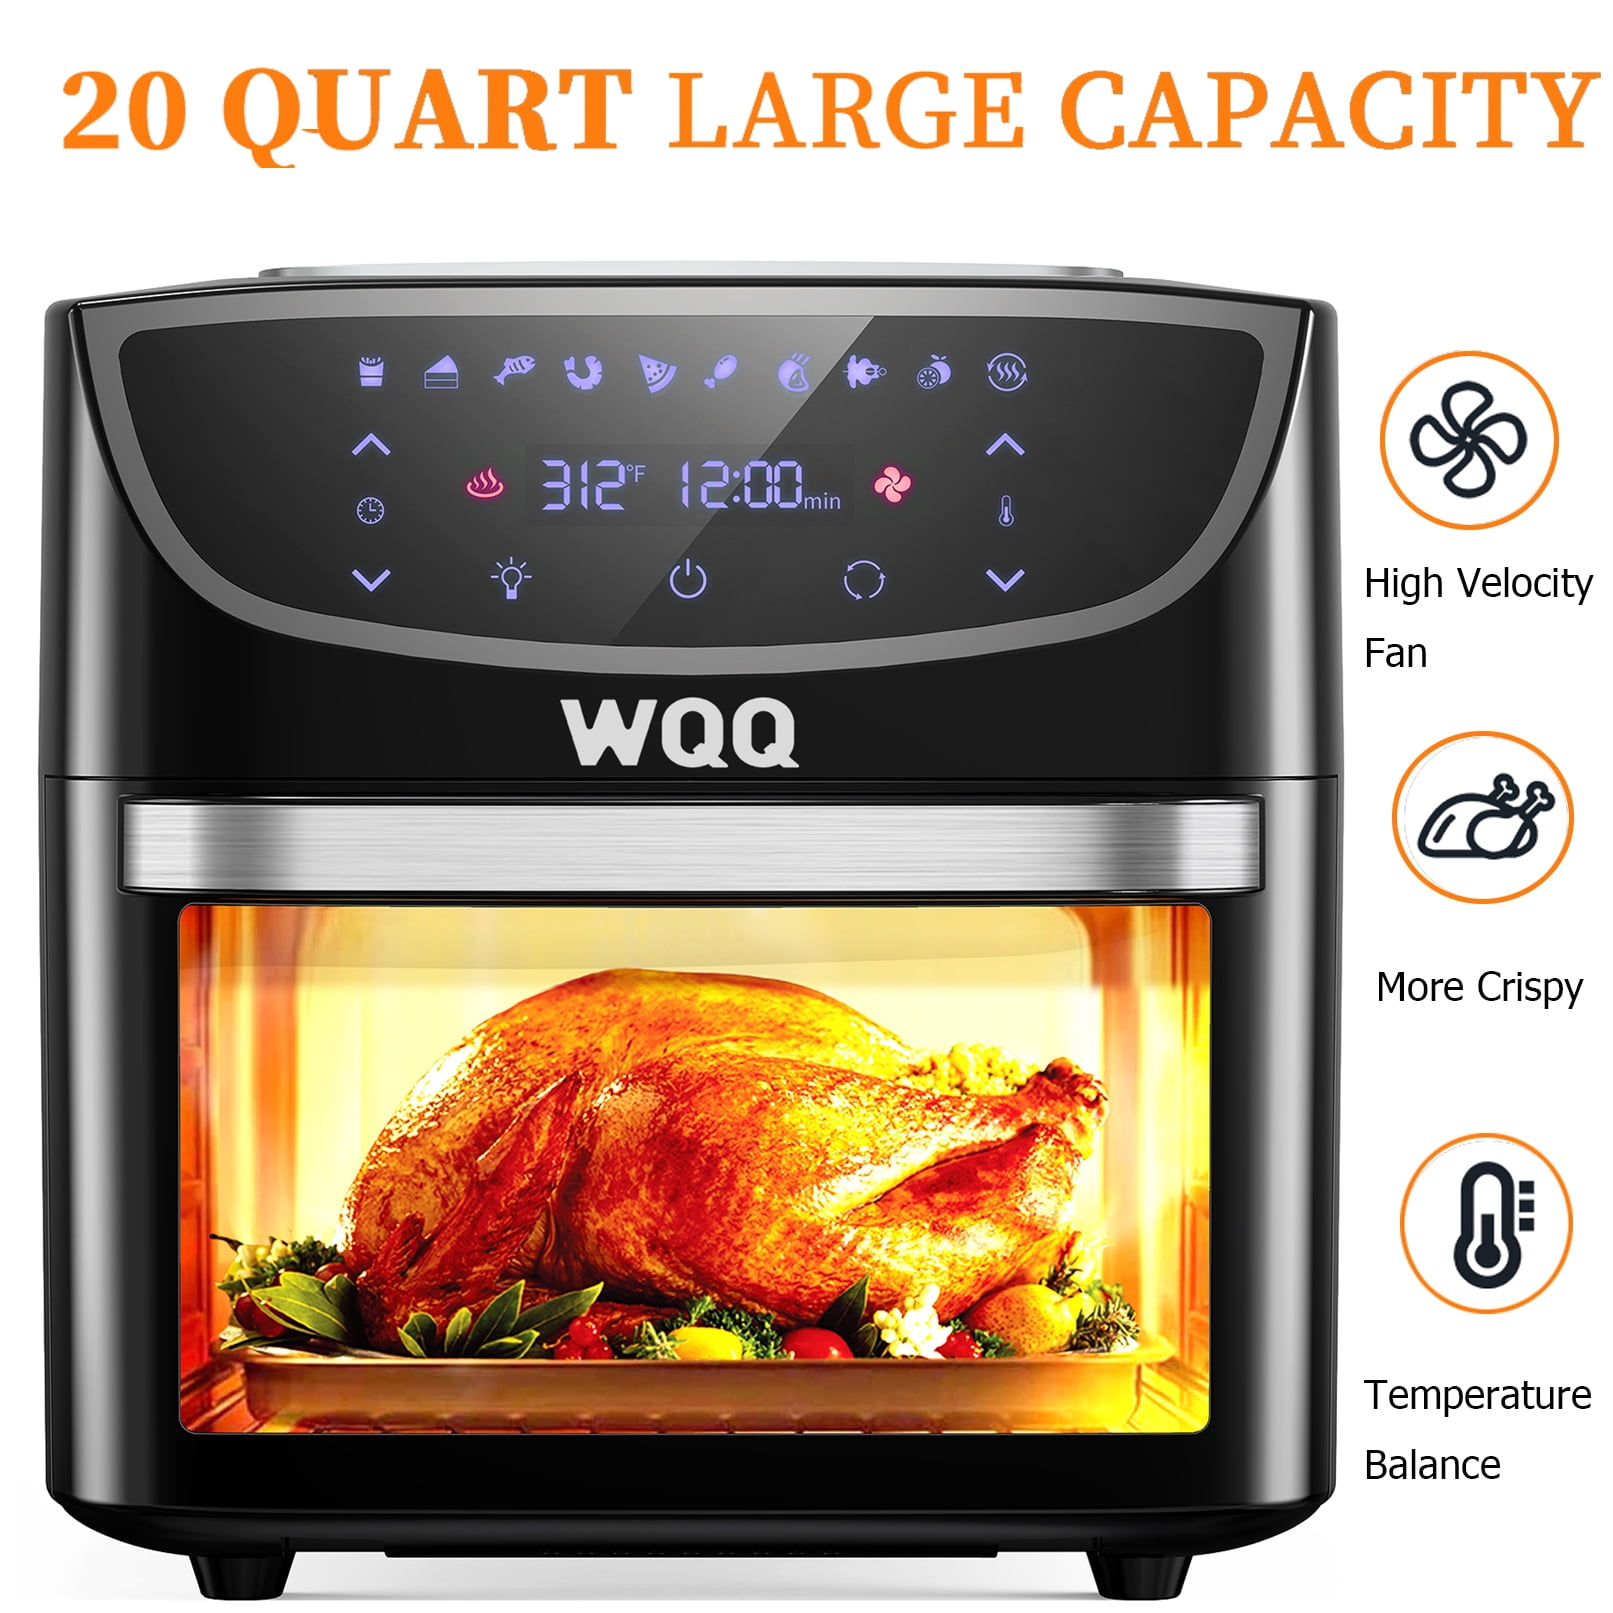 FastConvenient  10-in-1 20 QT Airfryer Oven with Visible Cooking Window ~  fastconvenient